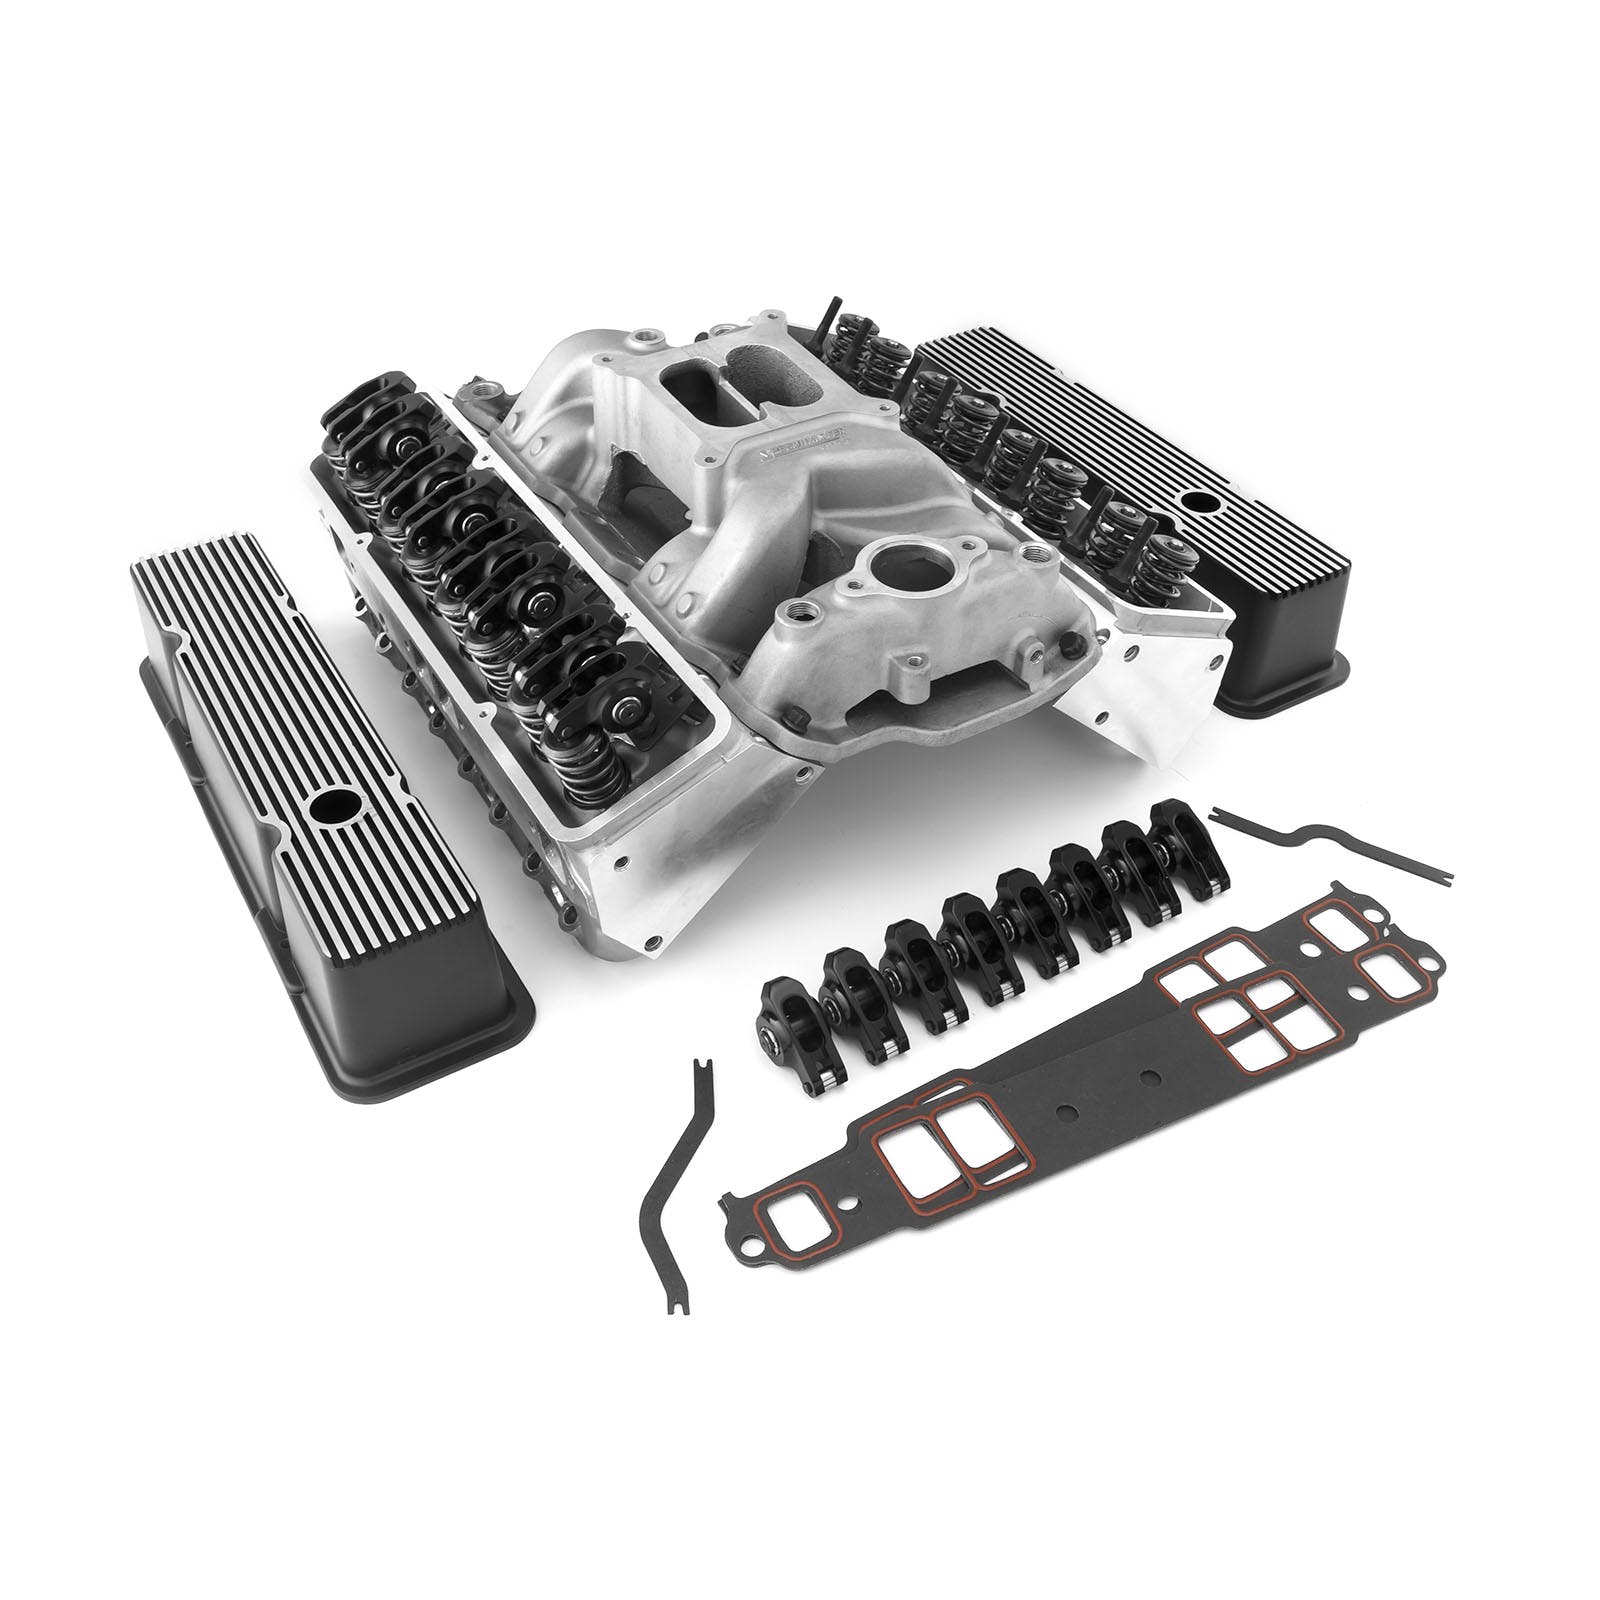 Speedmaster 1-435-003 Angle Cylinder Head Top End Engine Combo Kit - Outlaw Series